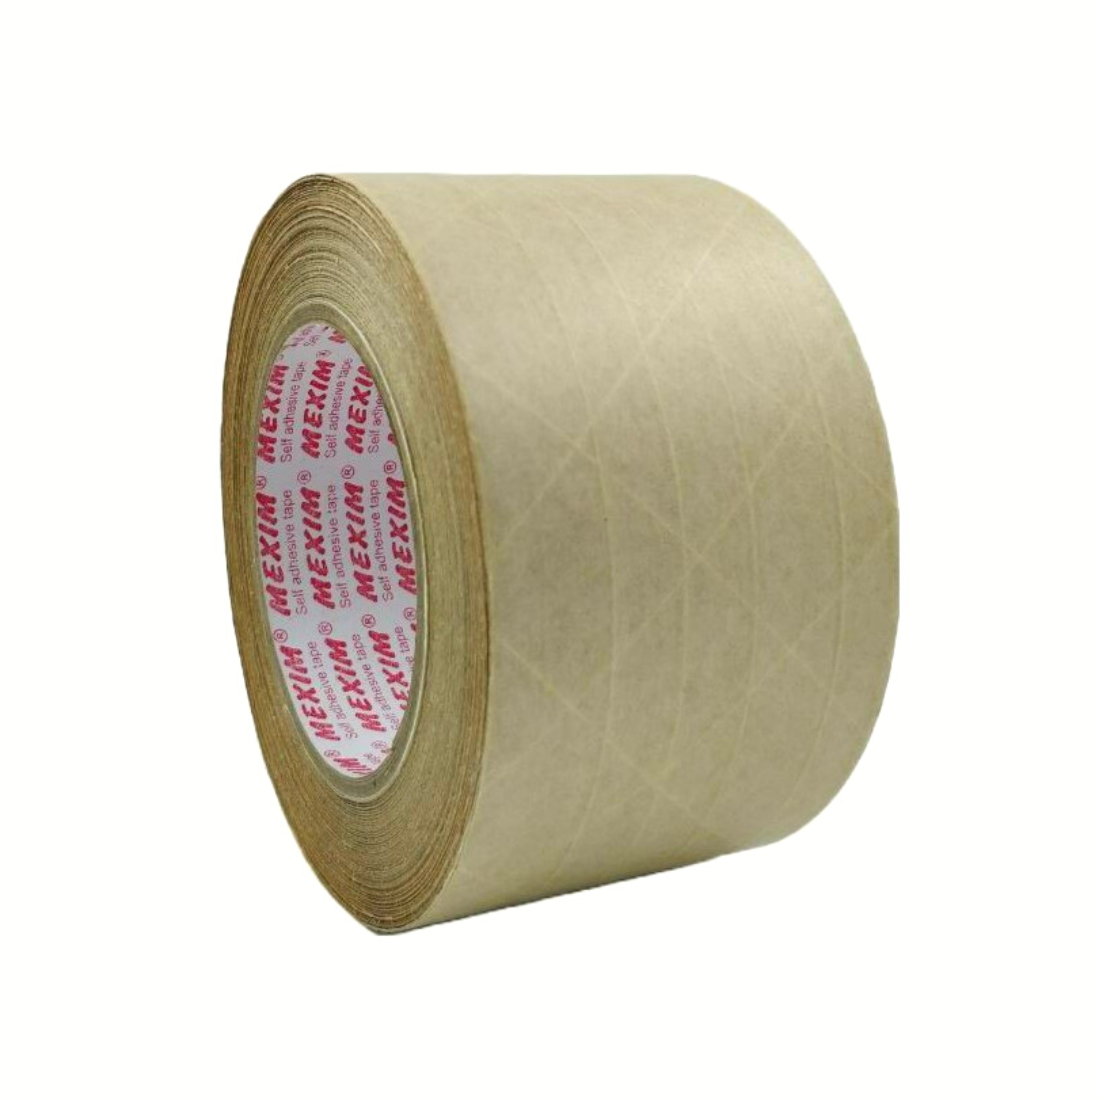 Ecosattva Water Activated Kraft Paper Tape | Brown Scrim Reinforced | 70 mm x 50 meters x 4 Rolls, Provides Tamer Proof Application